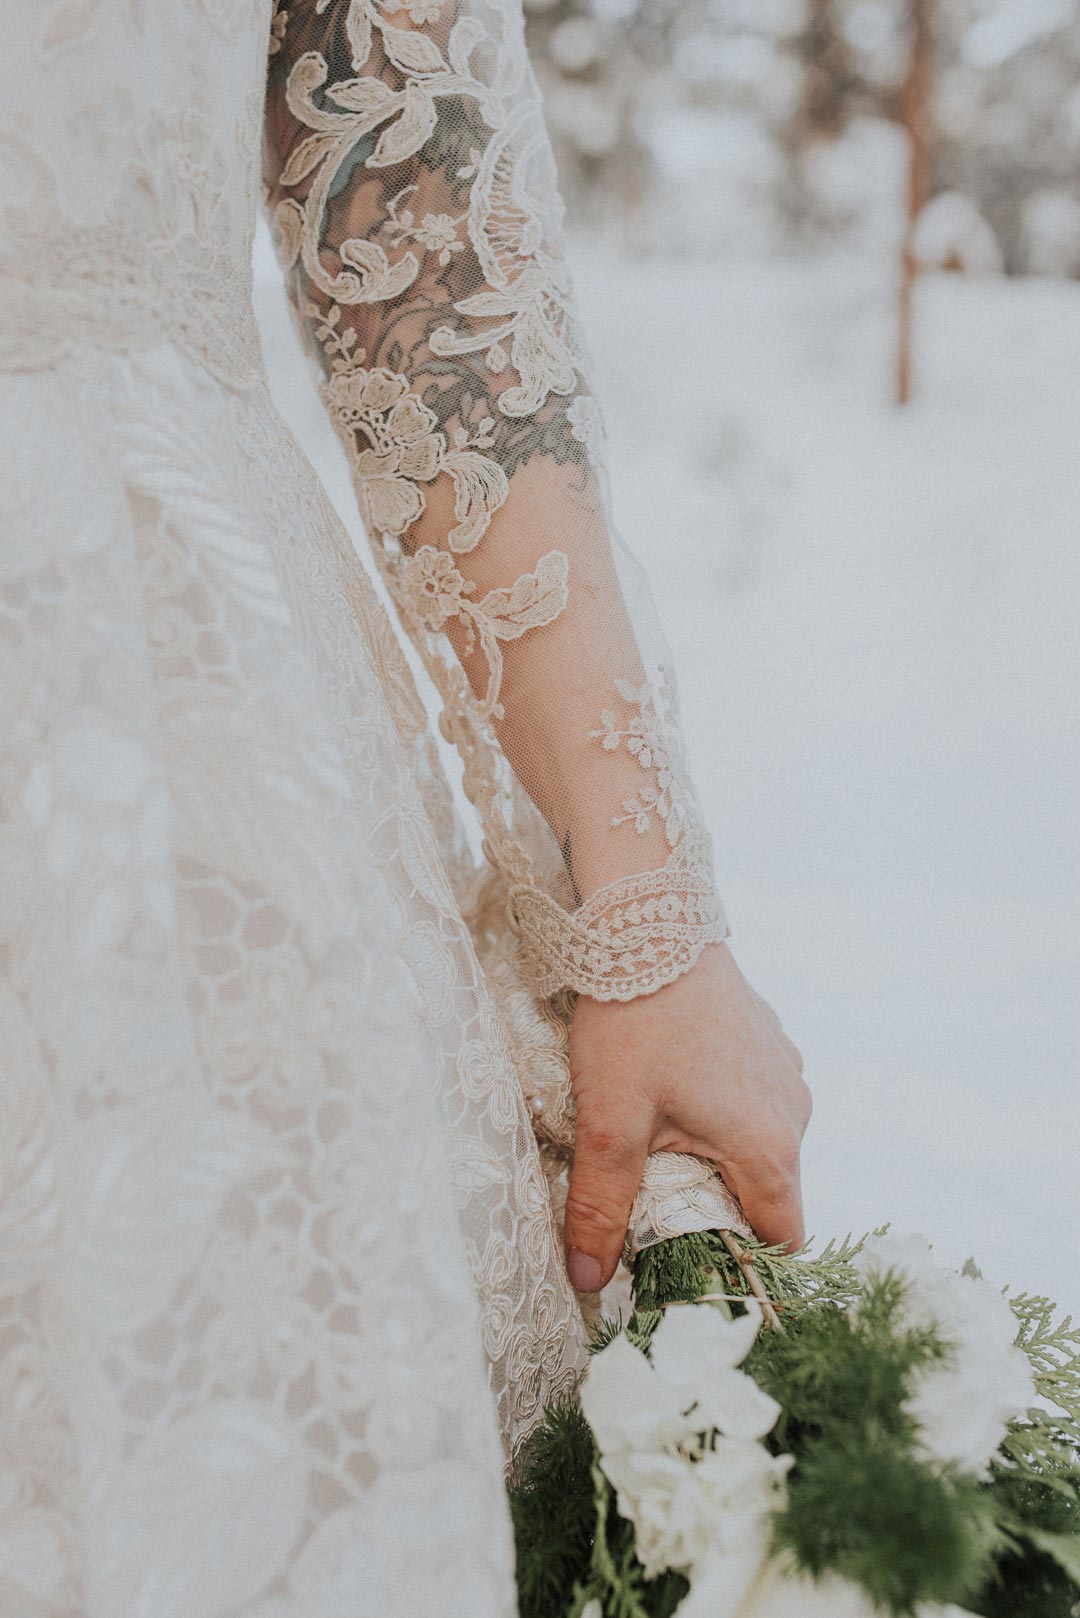 Lace sleeve detial of custom designed wedding dress by Claire Pettibone